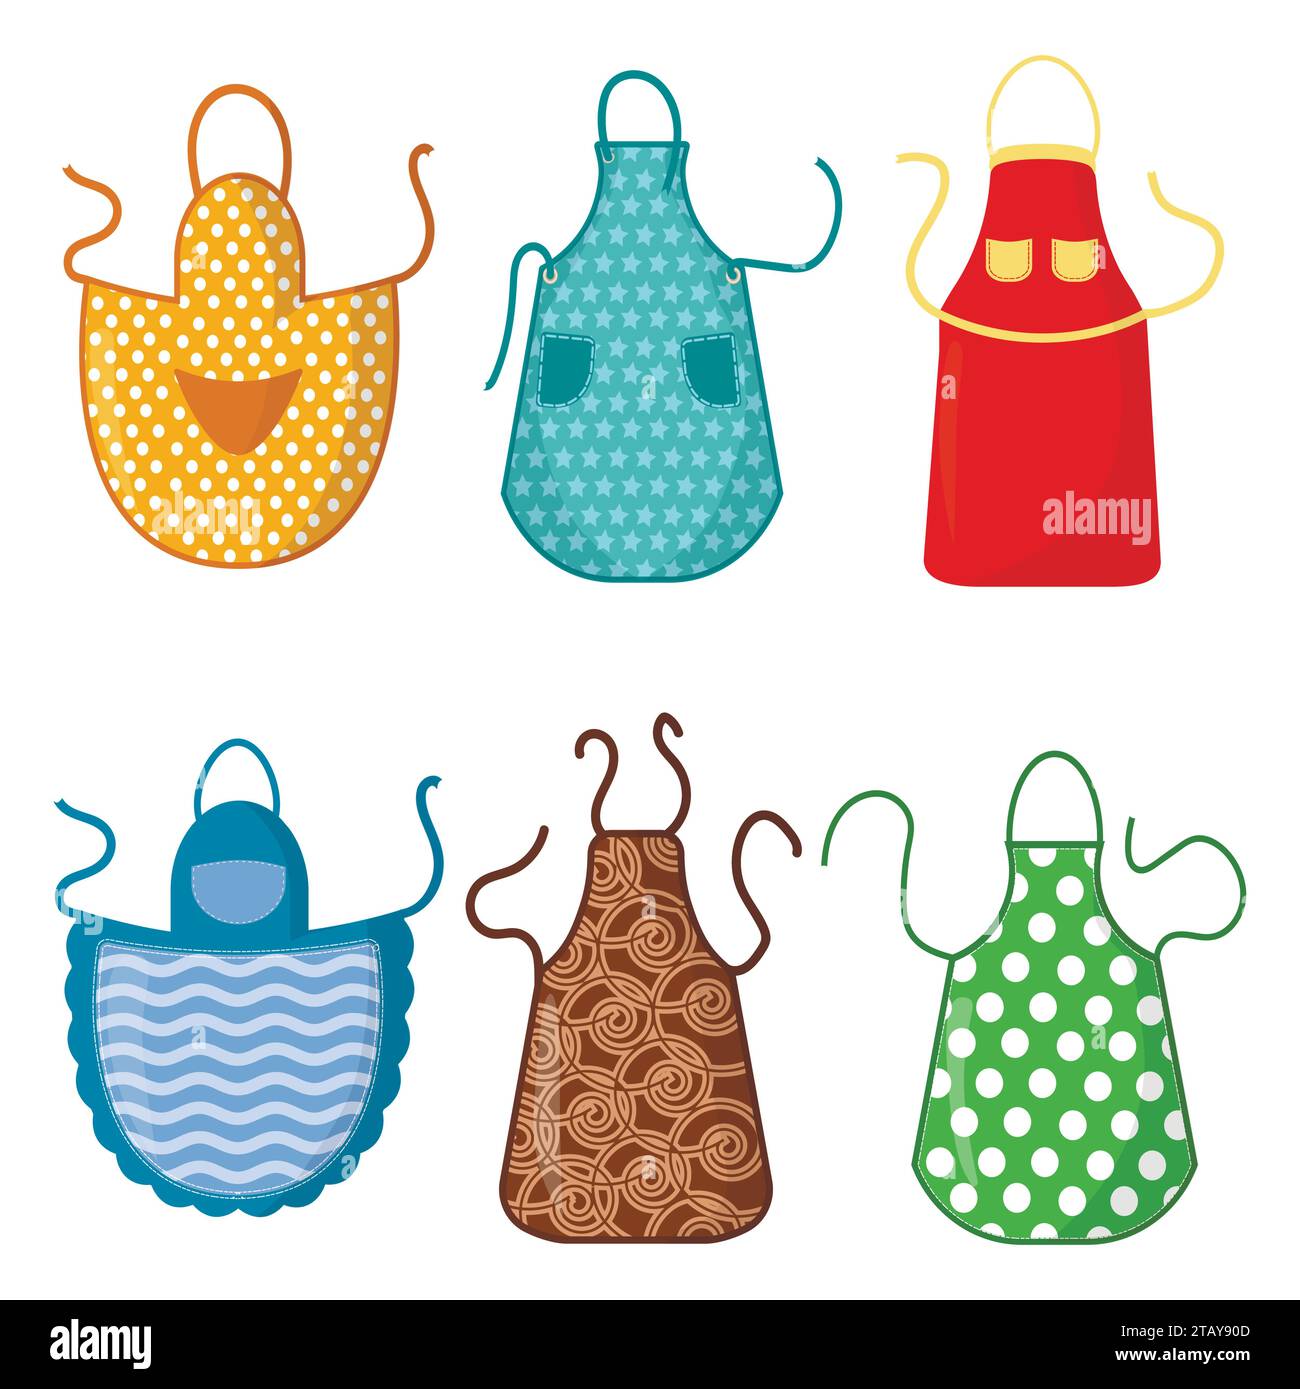 Set of colorful kitchen aprons with patterns icons isolated on white background. Protective garment. Cooking dress for housewife or chef of restaurant Stock Vector